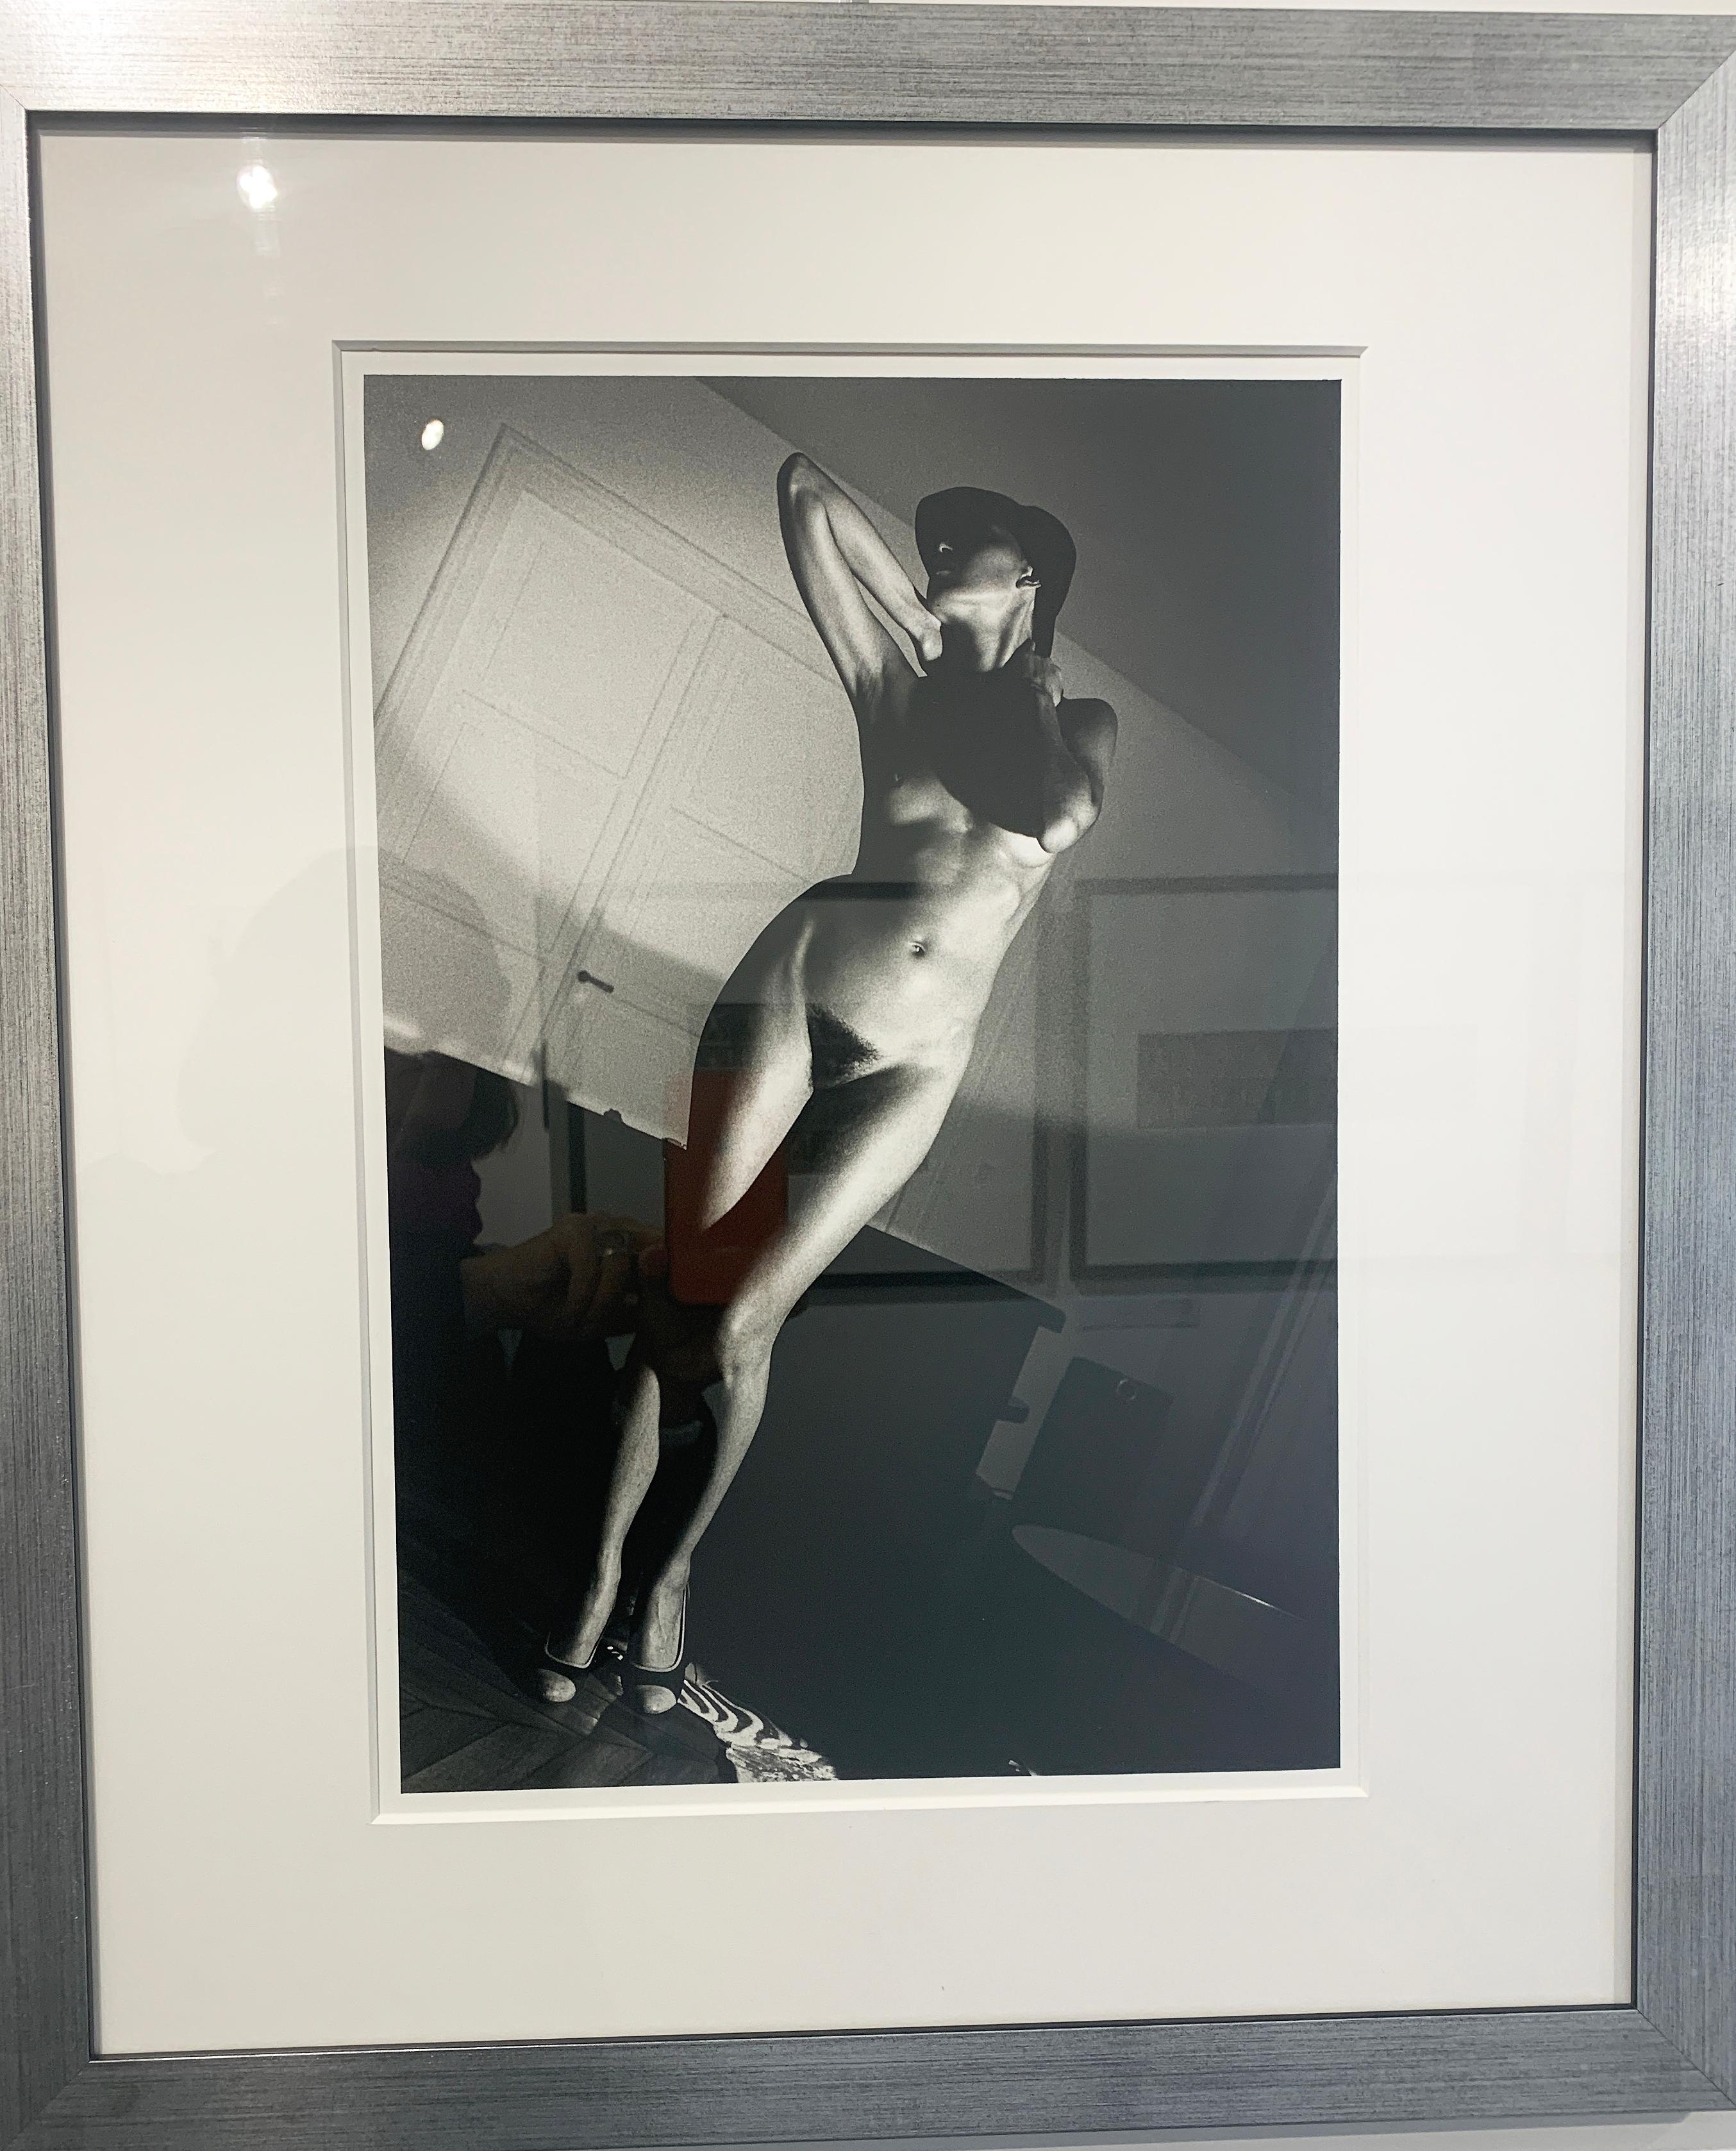 Jenny in My Apartment, Paris 1978 by Helmut Newton is a 20